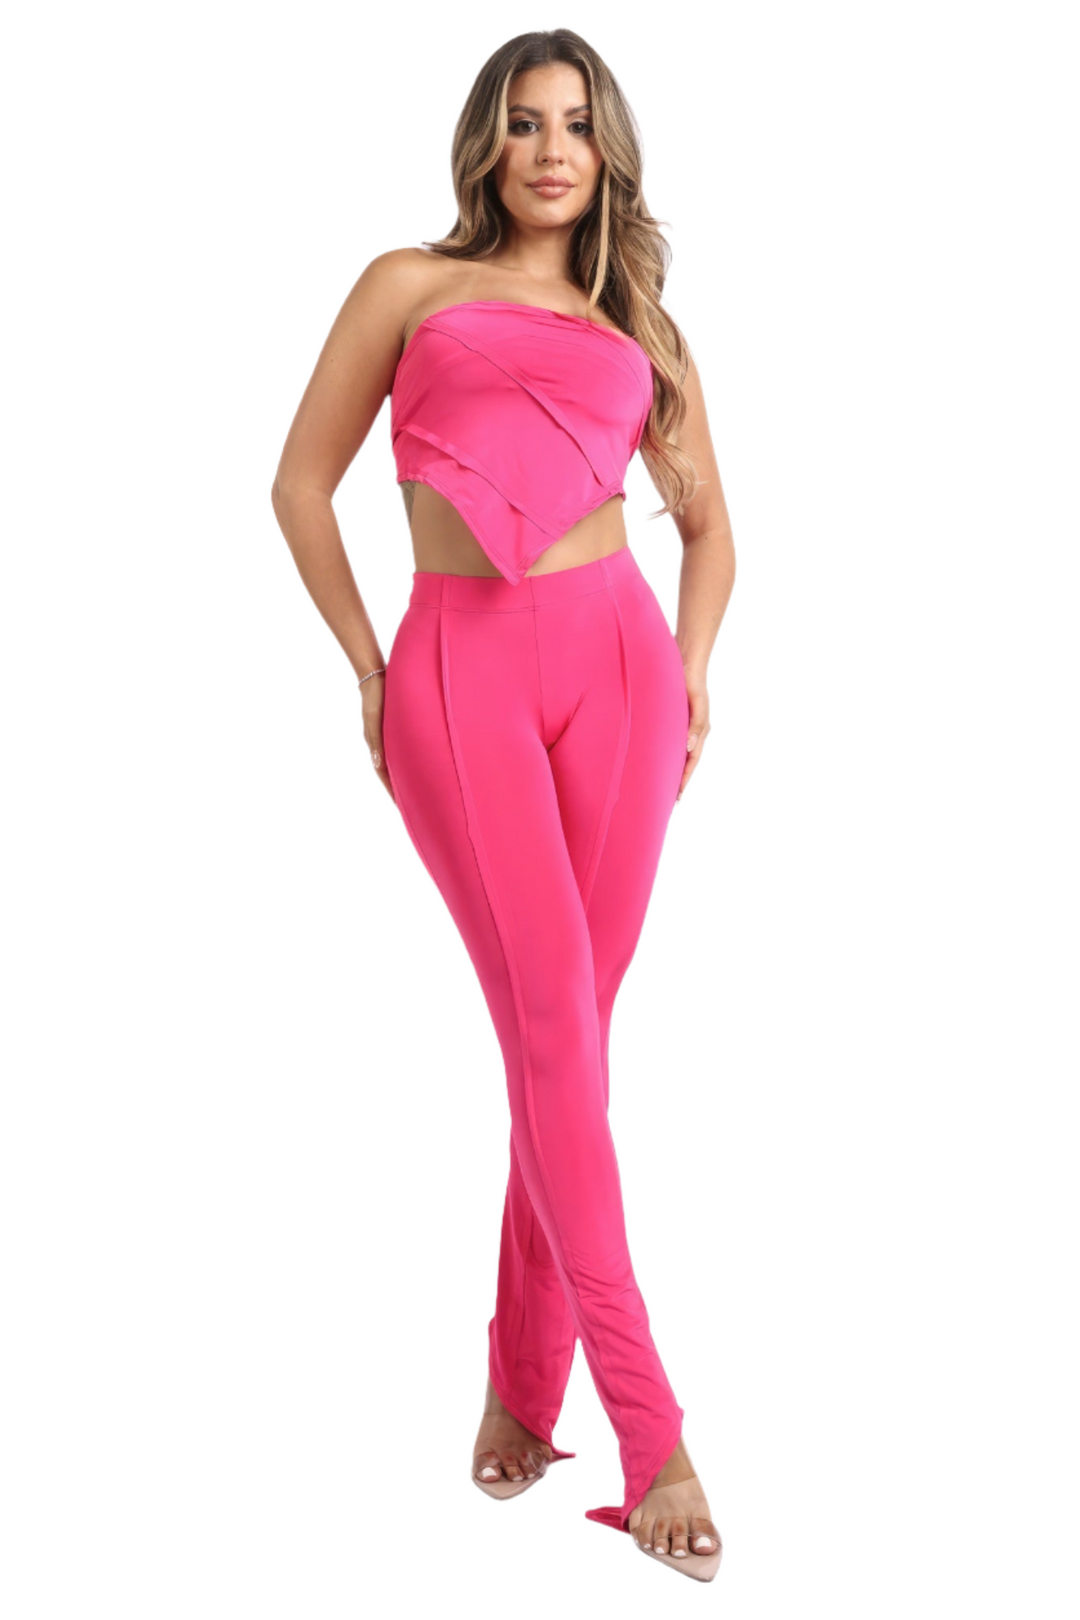 Handkerchief Tube Top Set in Fuchsia with Coordinating Bottoms - Sizes XSmall to XLarge